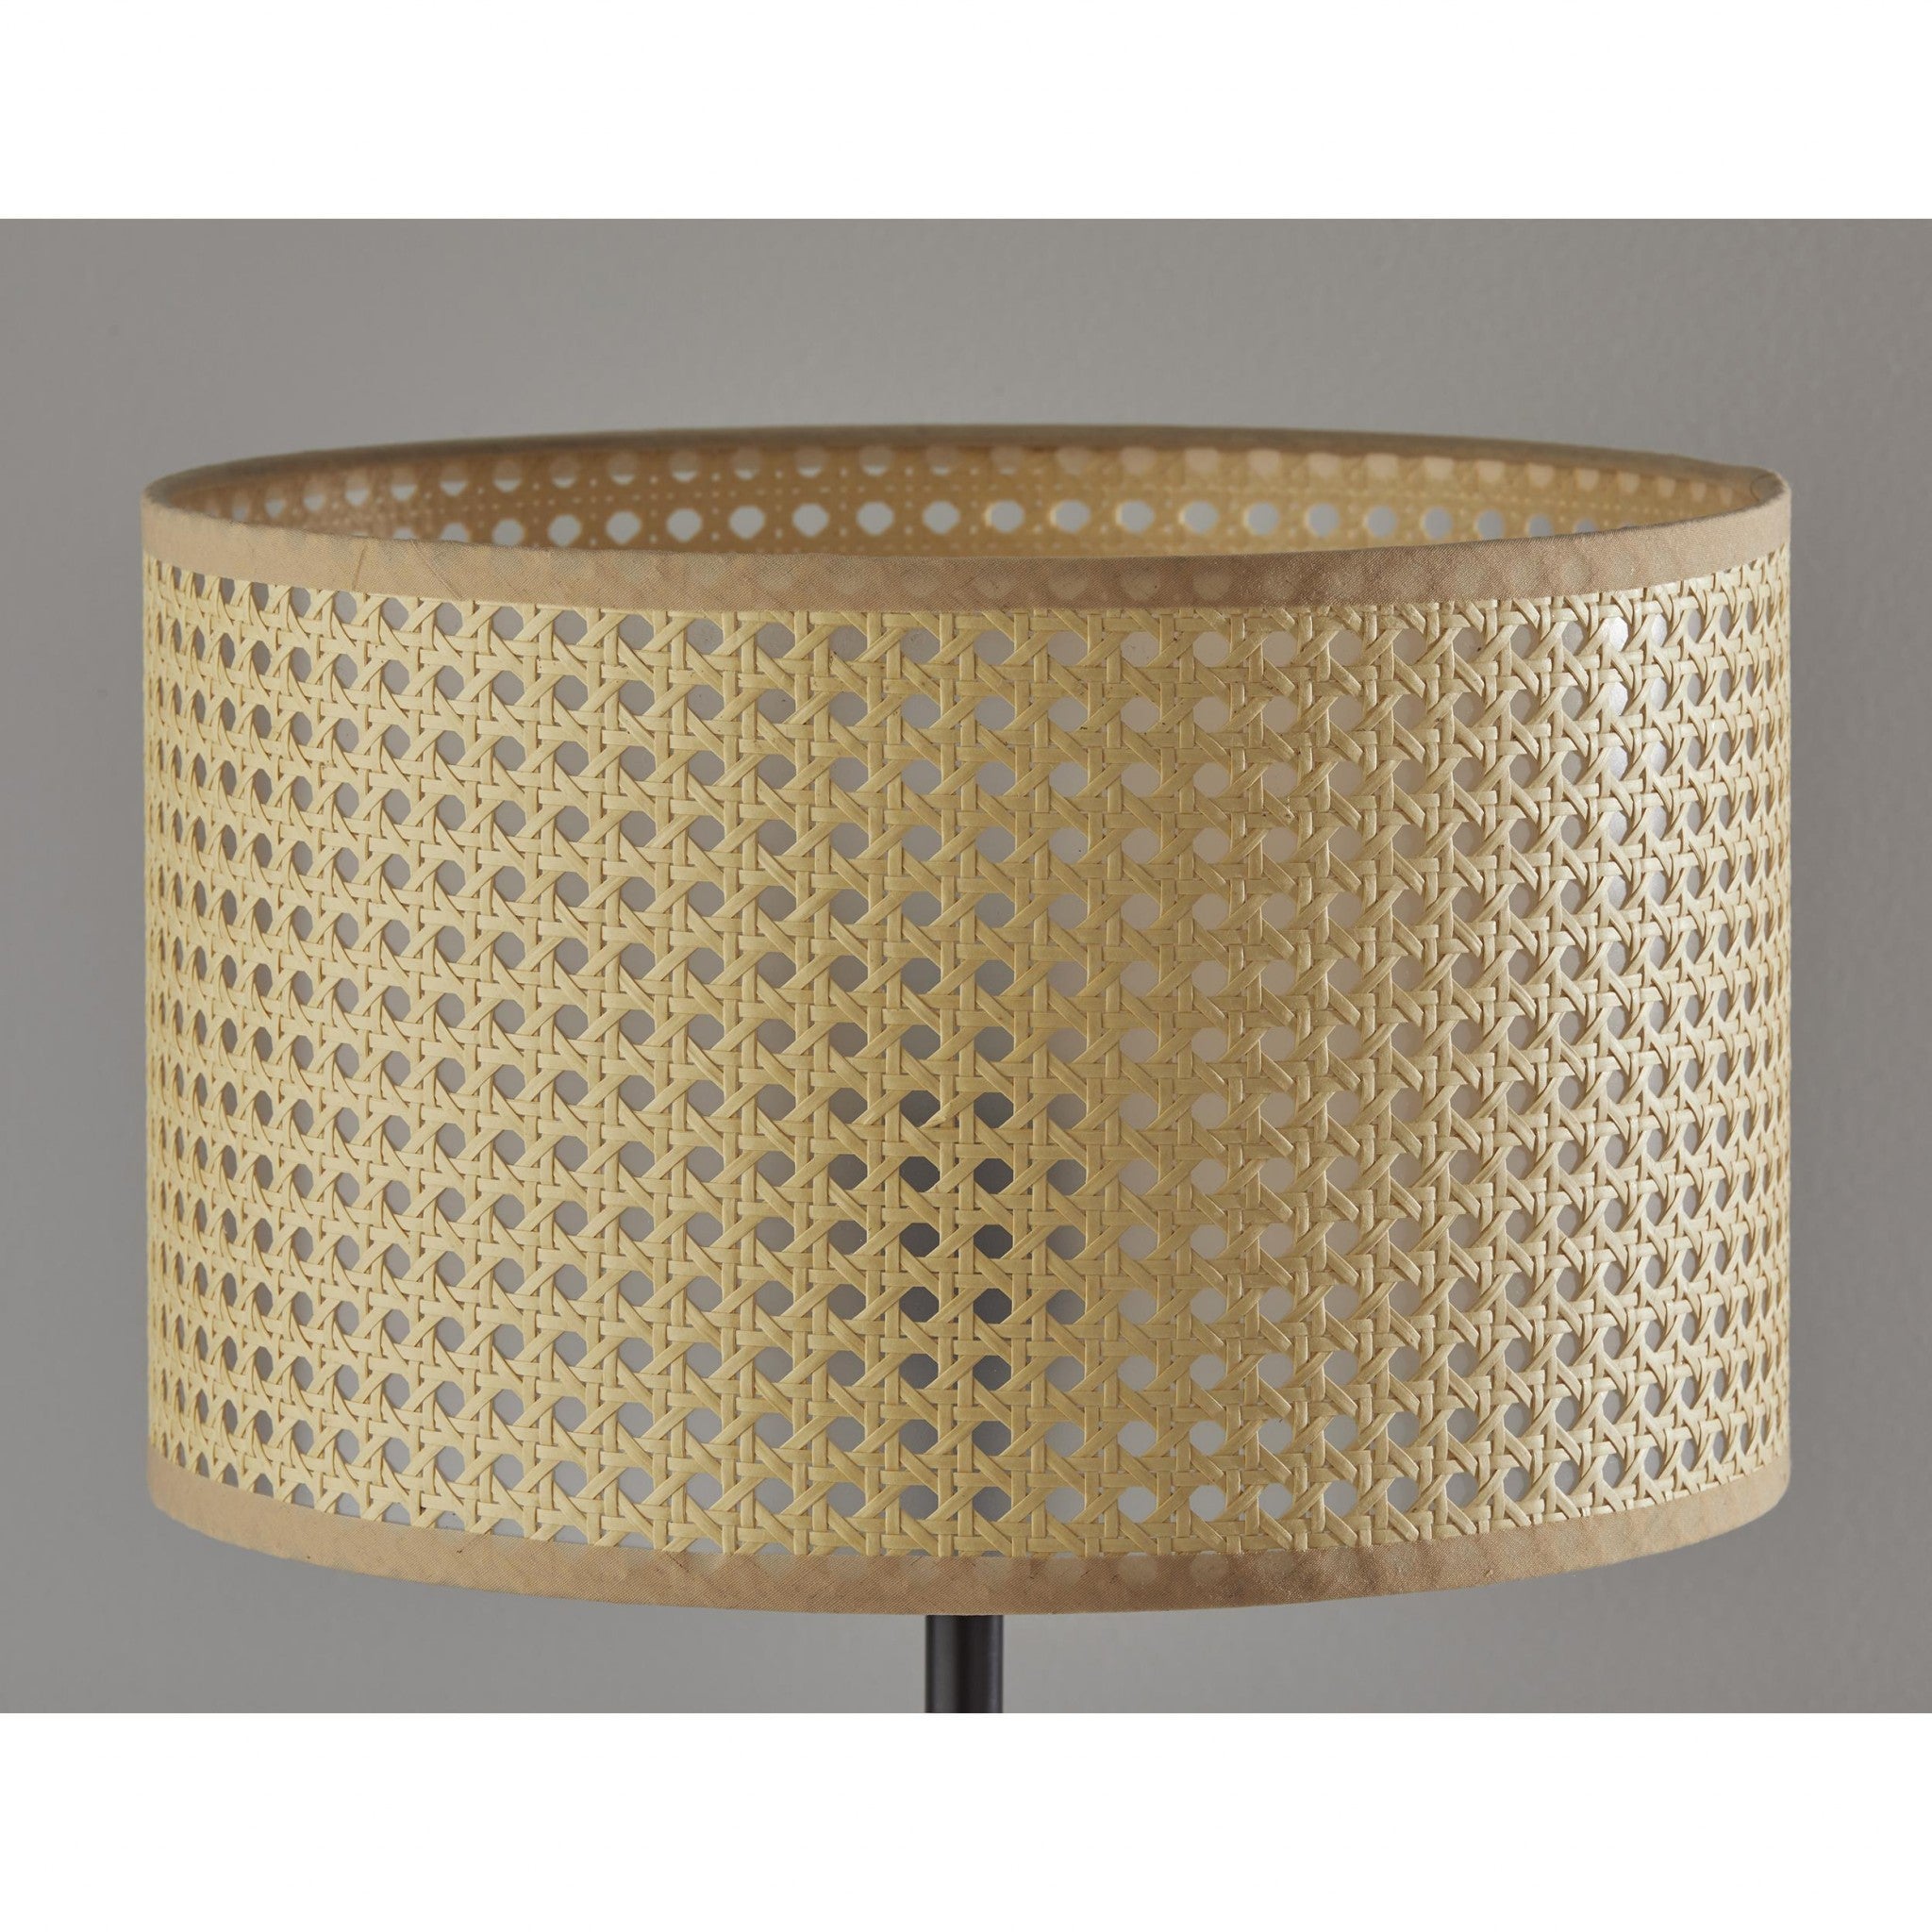 Open Cane Web Natural Shade Dark Bronze Table Lamp - Tuesday Morning-Table Lamps